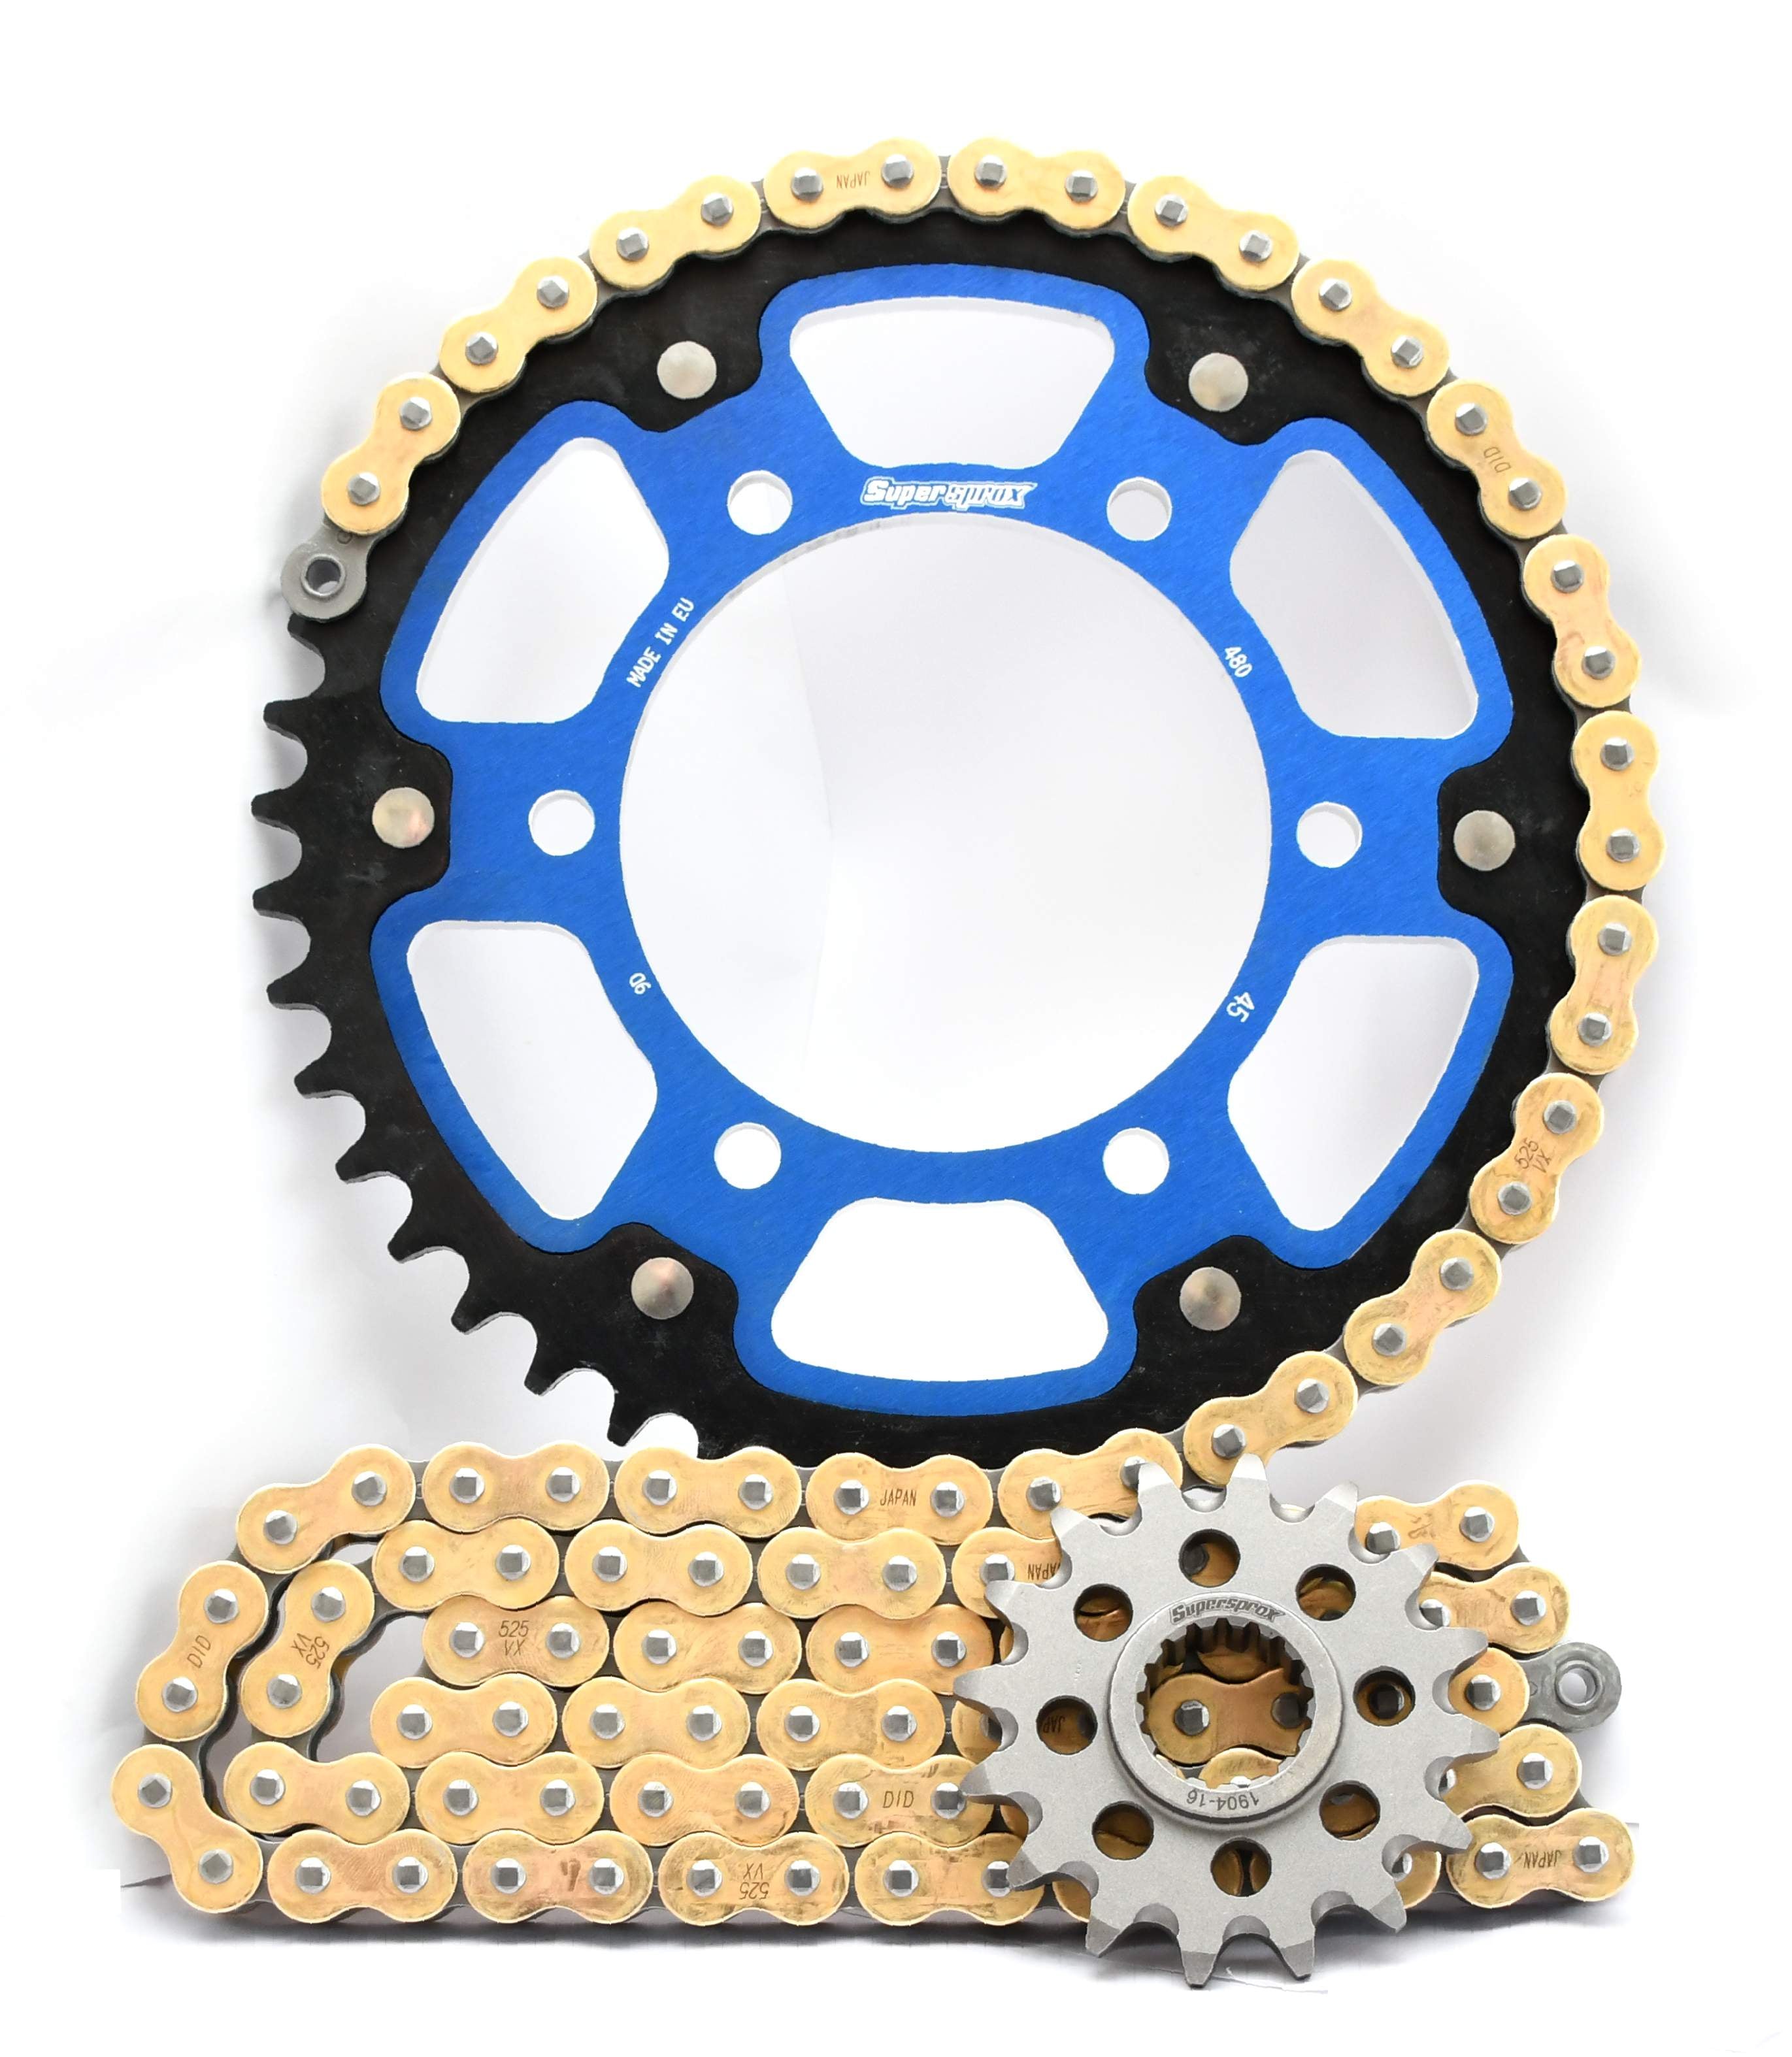 Supersprox Chain & Sprocket Kit for Yamaha YZF R6 2003-2005 - Choose Your Gearing - 530 Conversion - 0